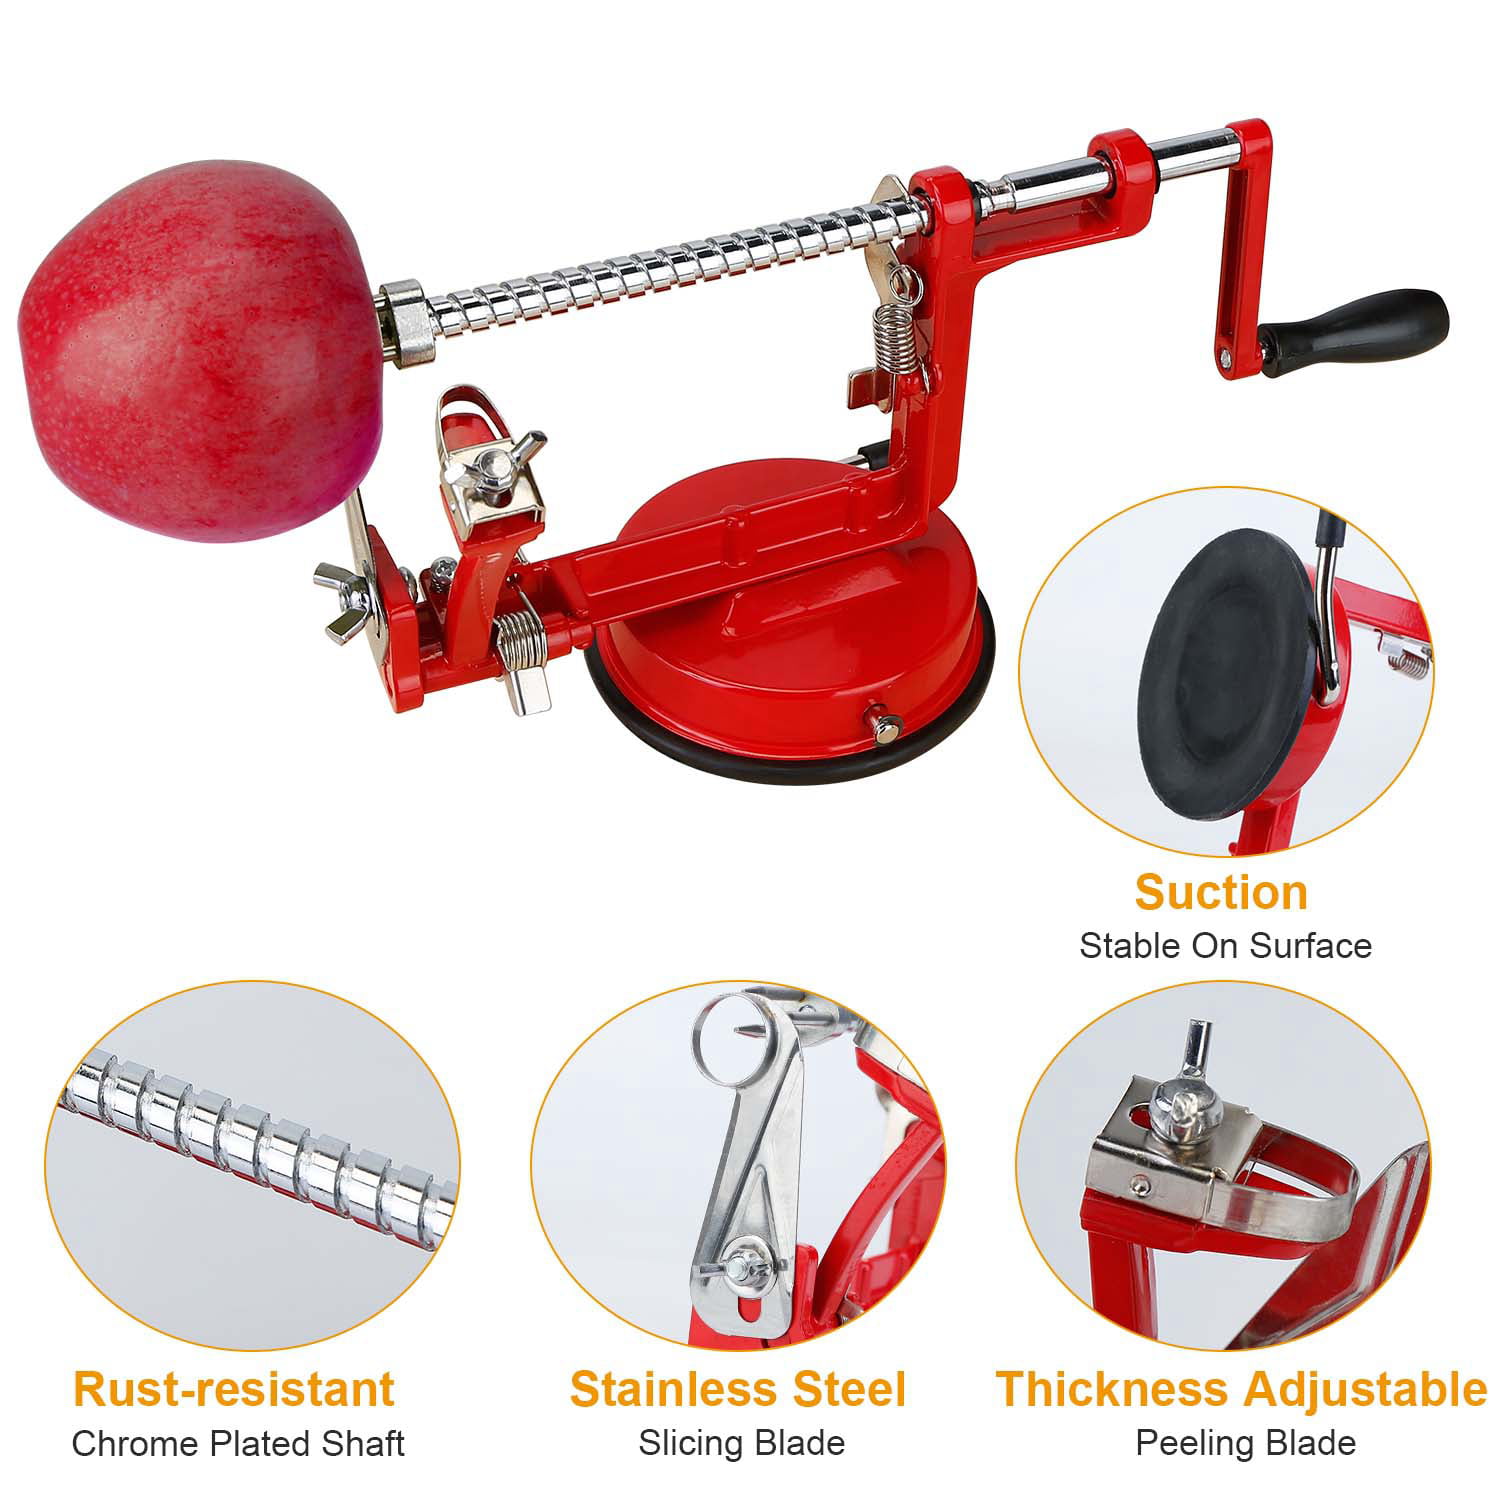 1 Apple Peeler For Kitchenaid Images, Stock Photos, 3D objects